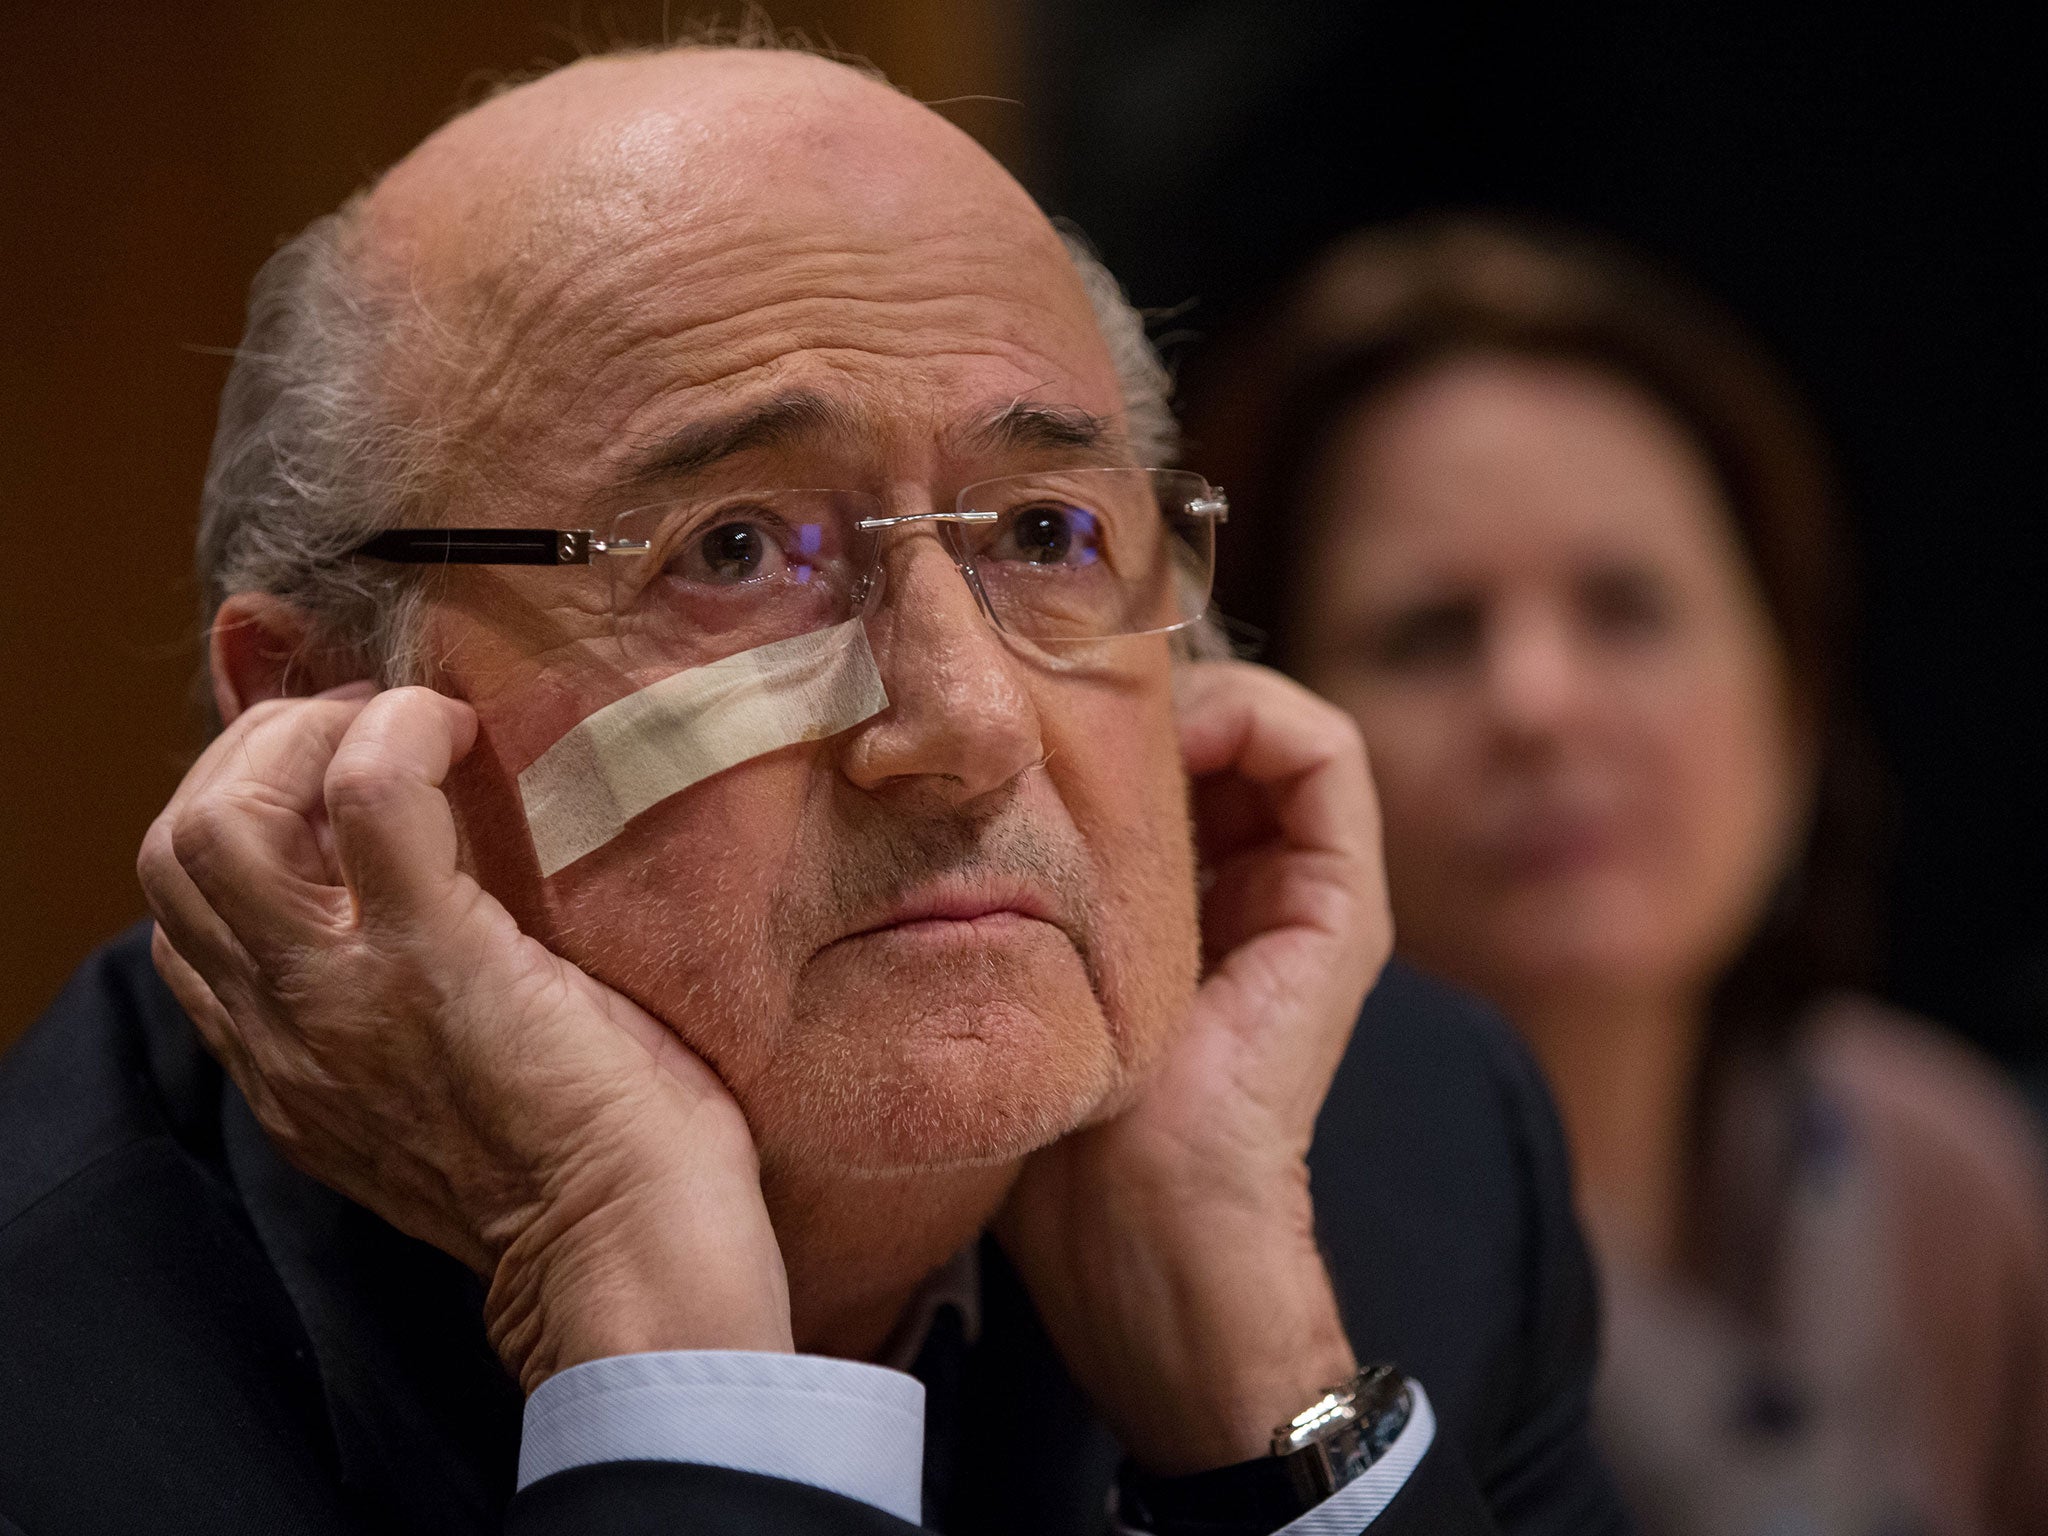 Fifa president Sepp Blatter has been banned from football for eight years by Fifa